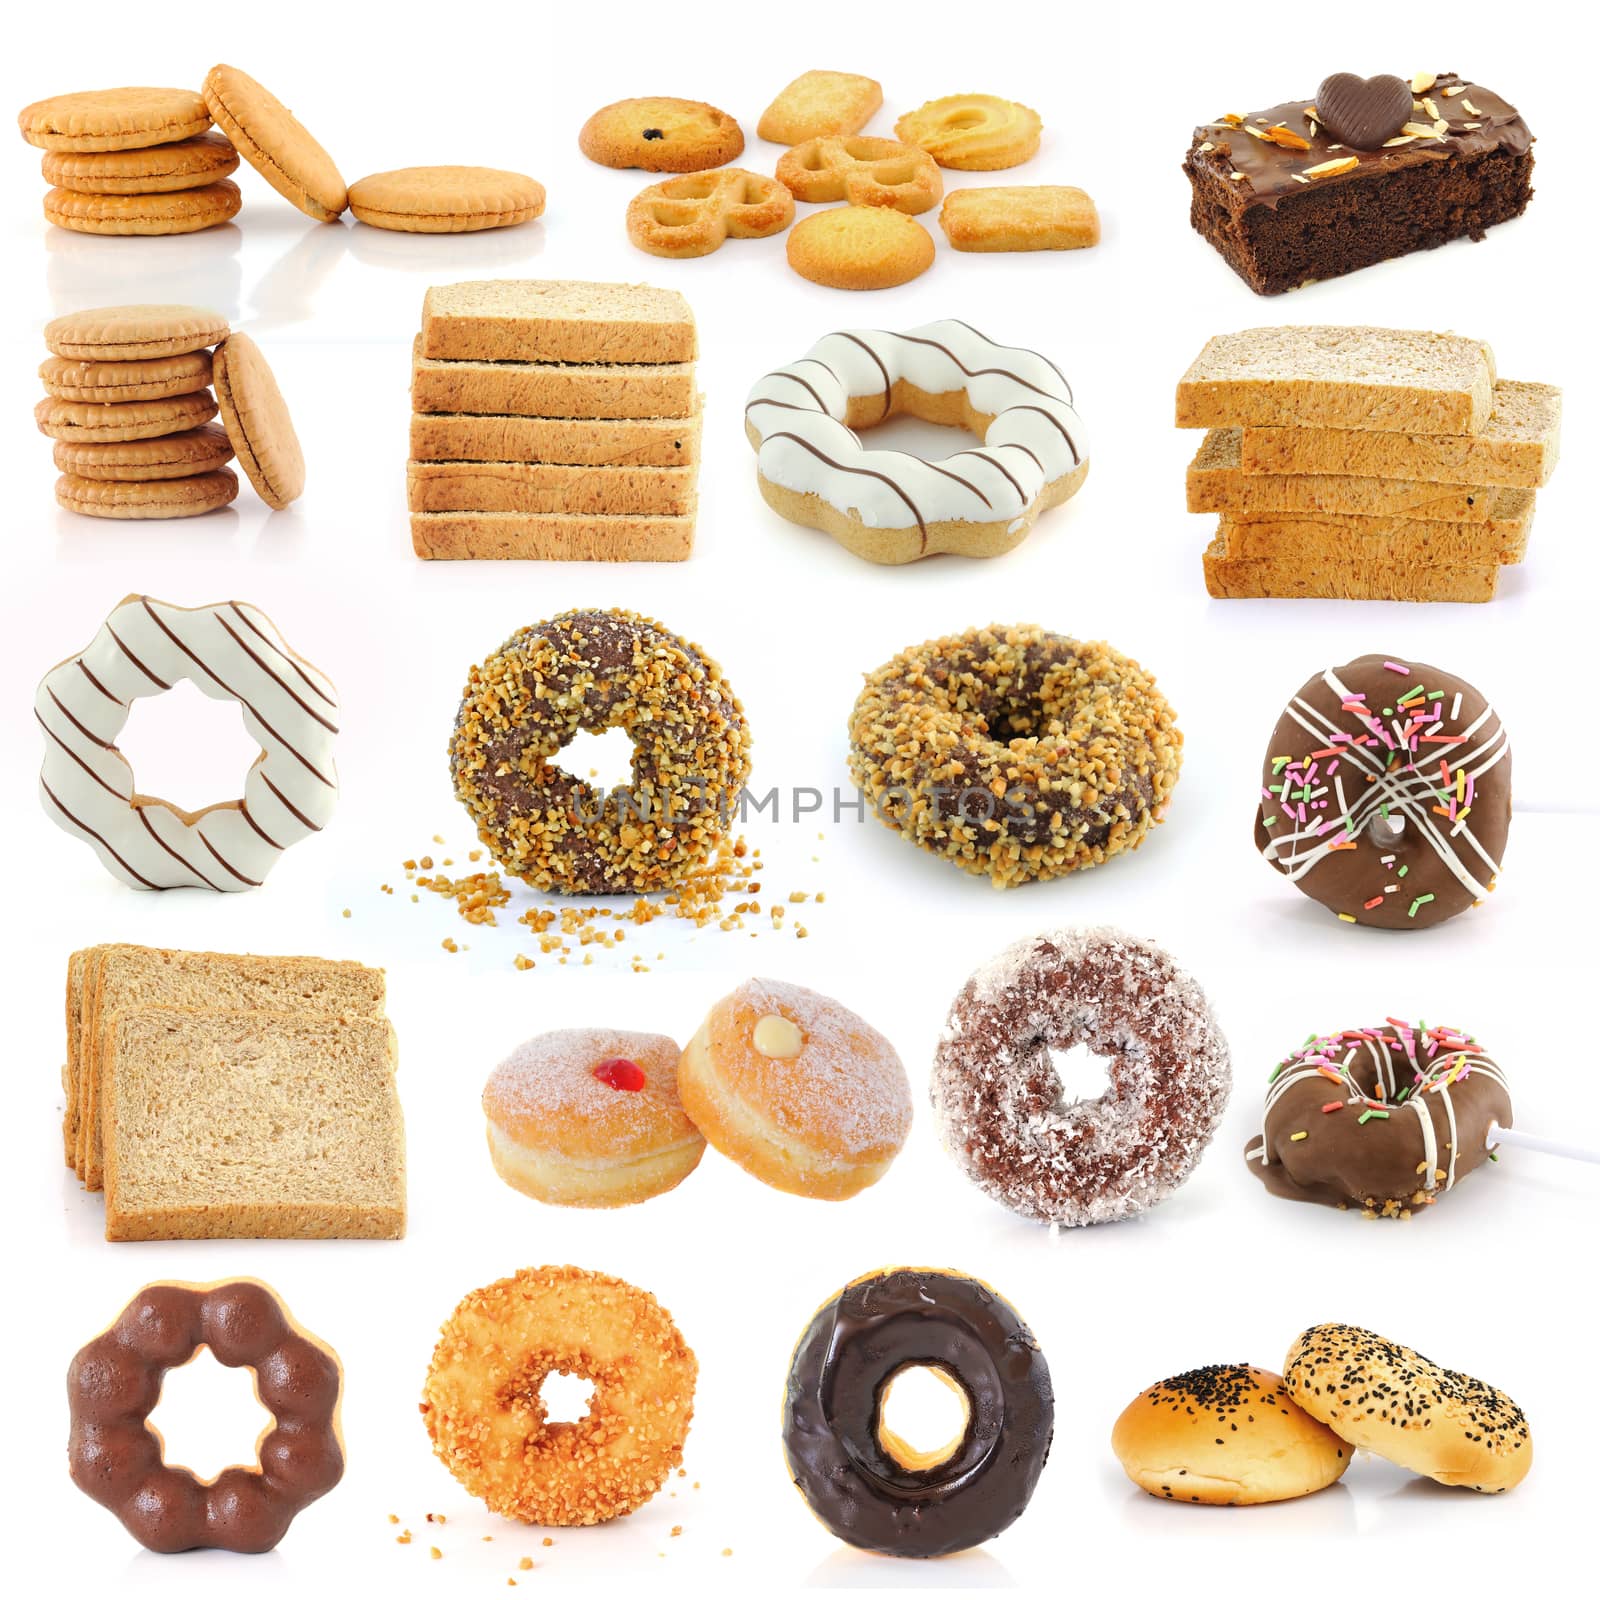 Cookies, bread, donuts, brownies isolated on white background by sommai